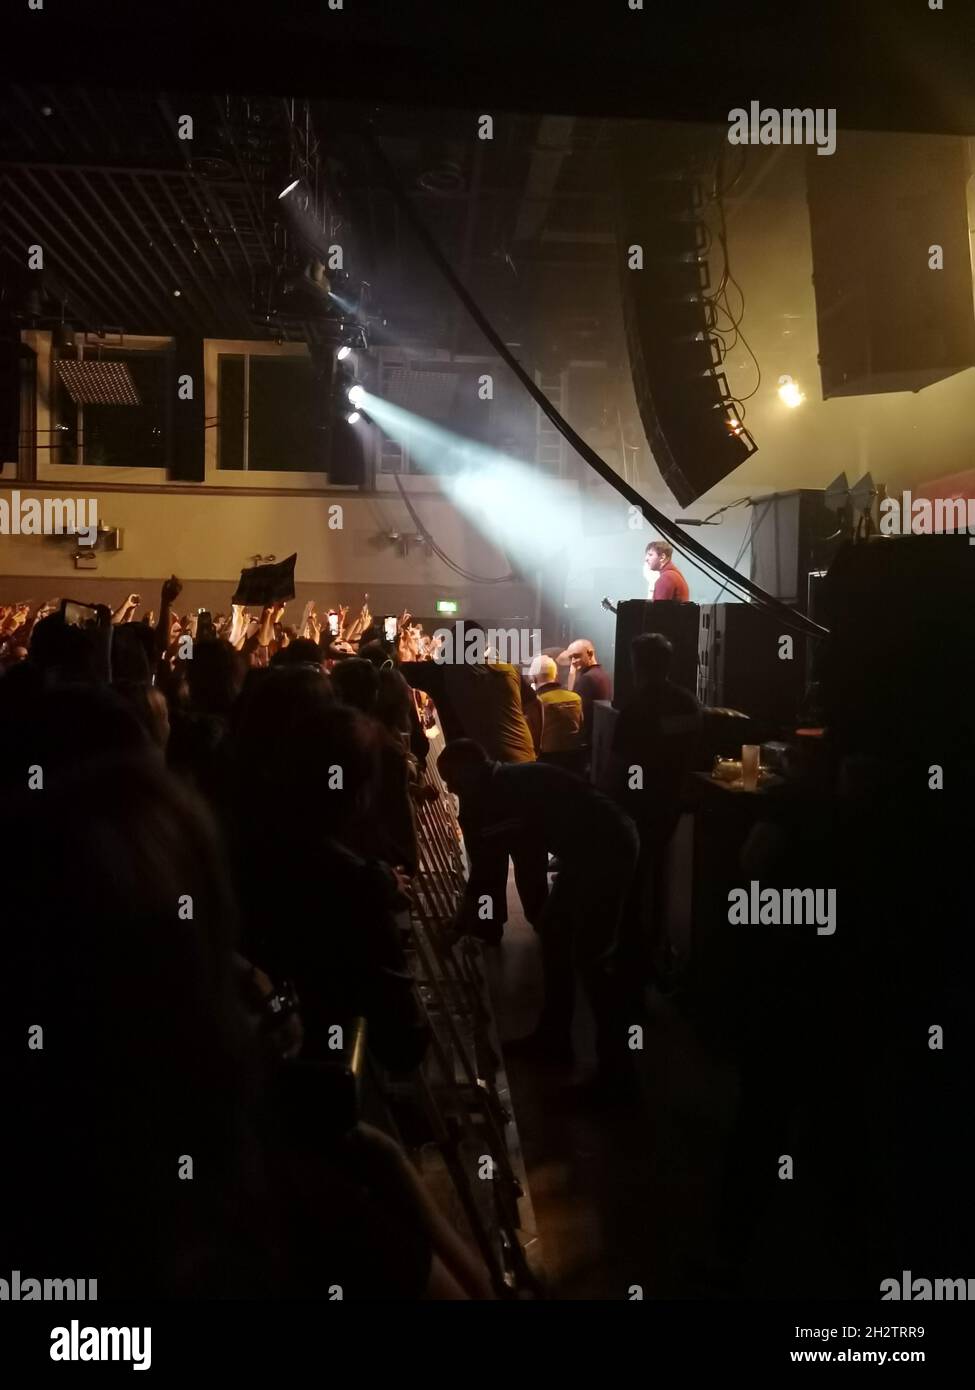 19 October 2021 Mountford Hall, Liverpool Guild of Students, YungBlud Life on Mars tour final night, wide angle. View of the audience and stage from the wings. Stock Photo